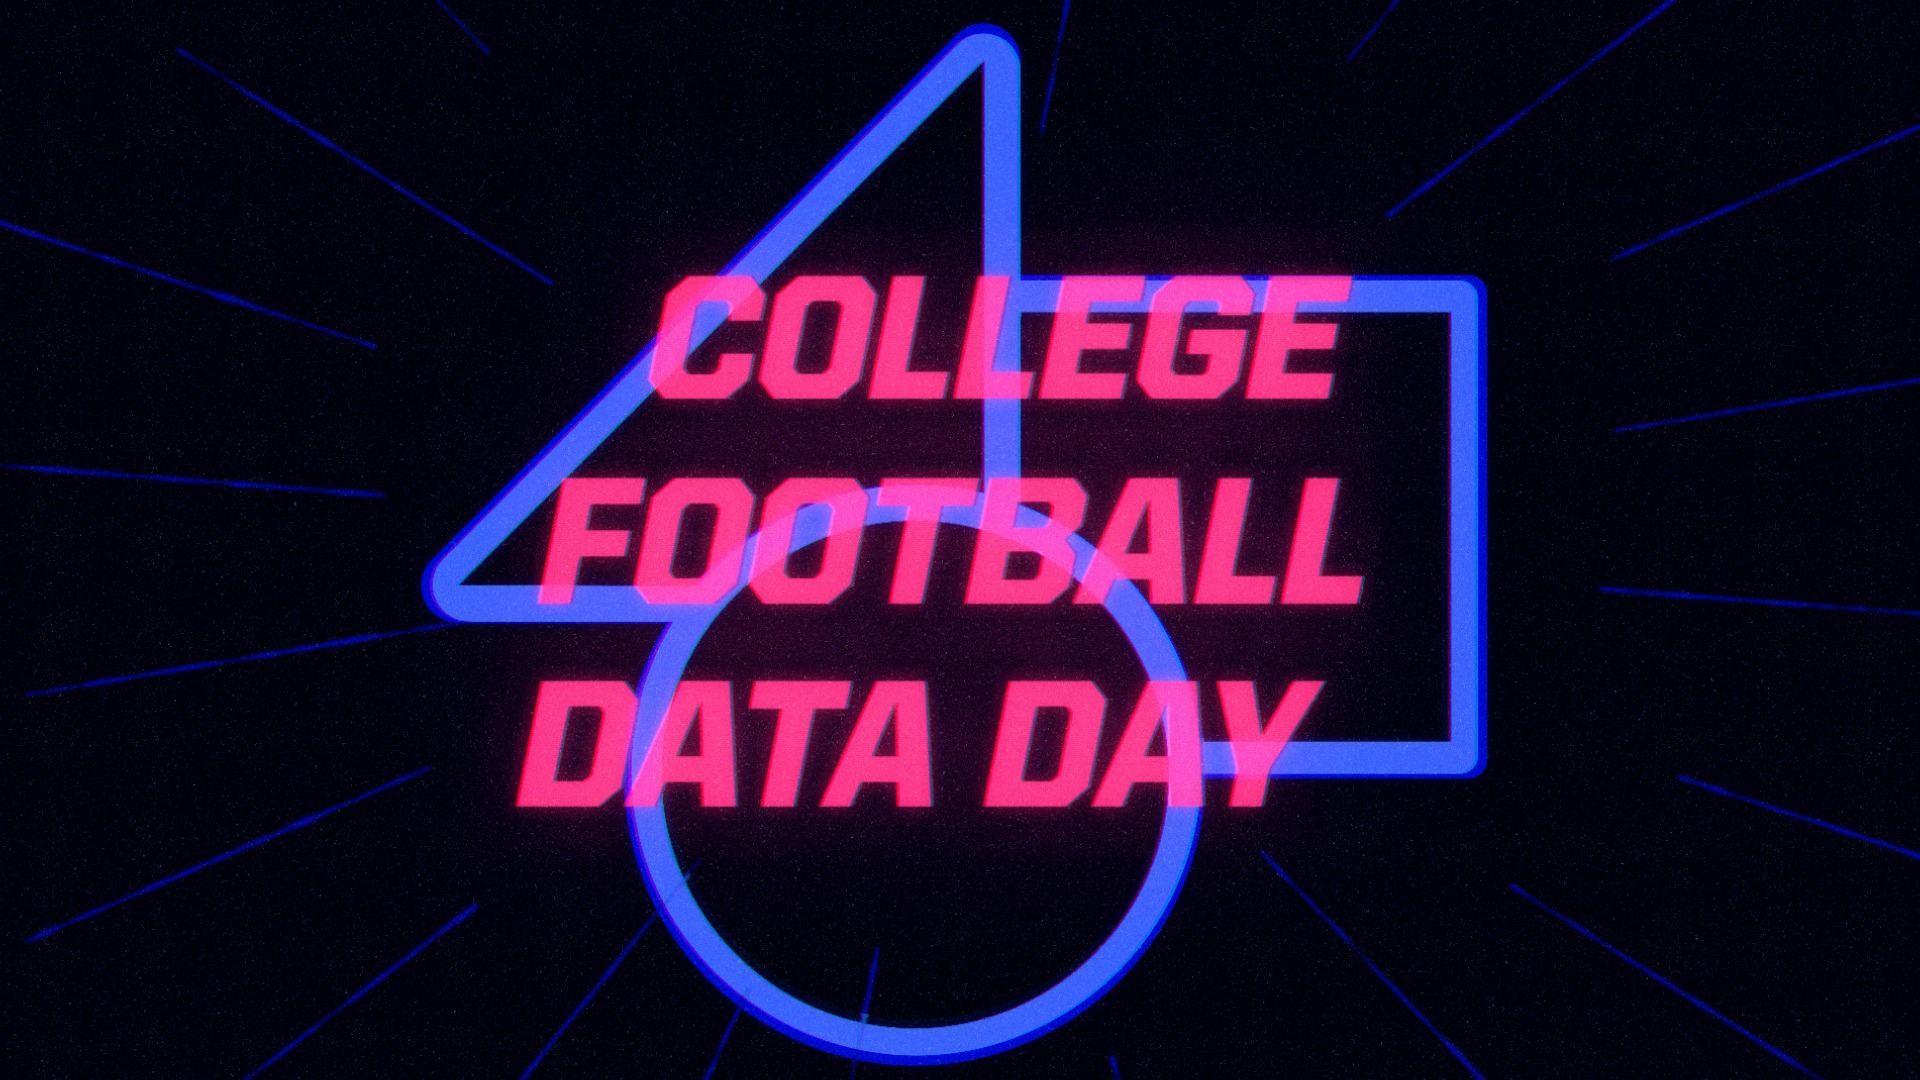 College Football Rivalry Weekend Preview | The Data Day